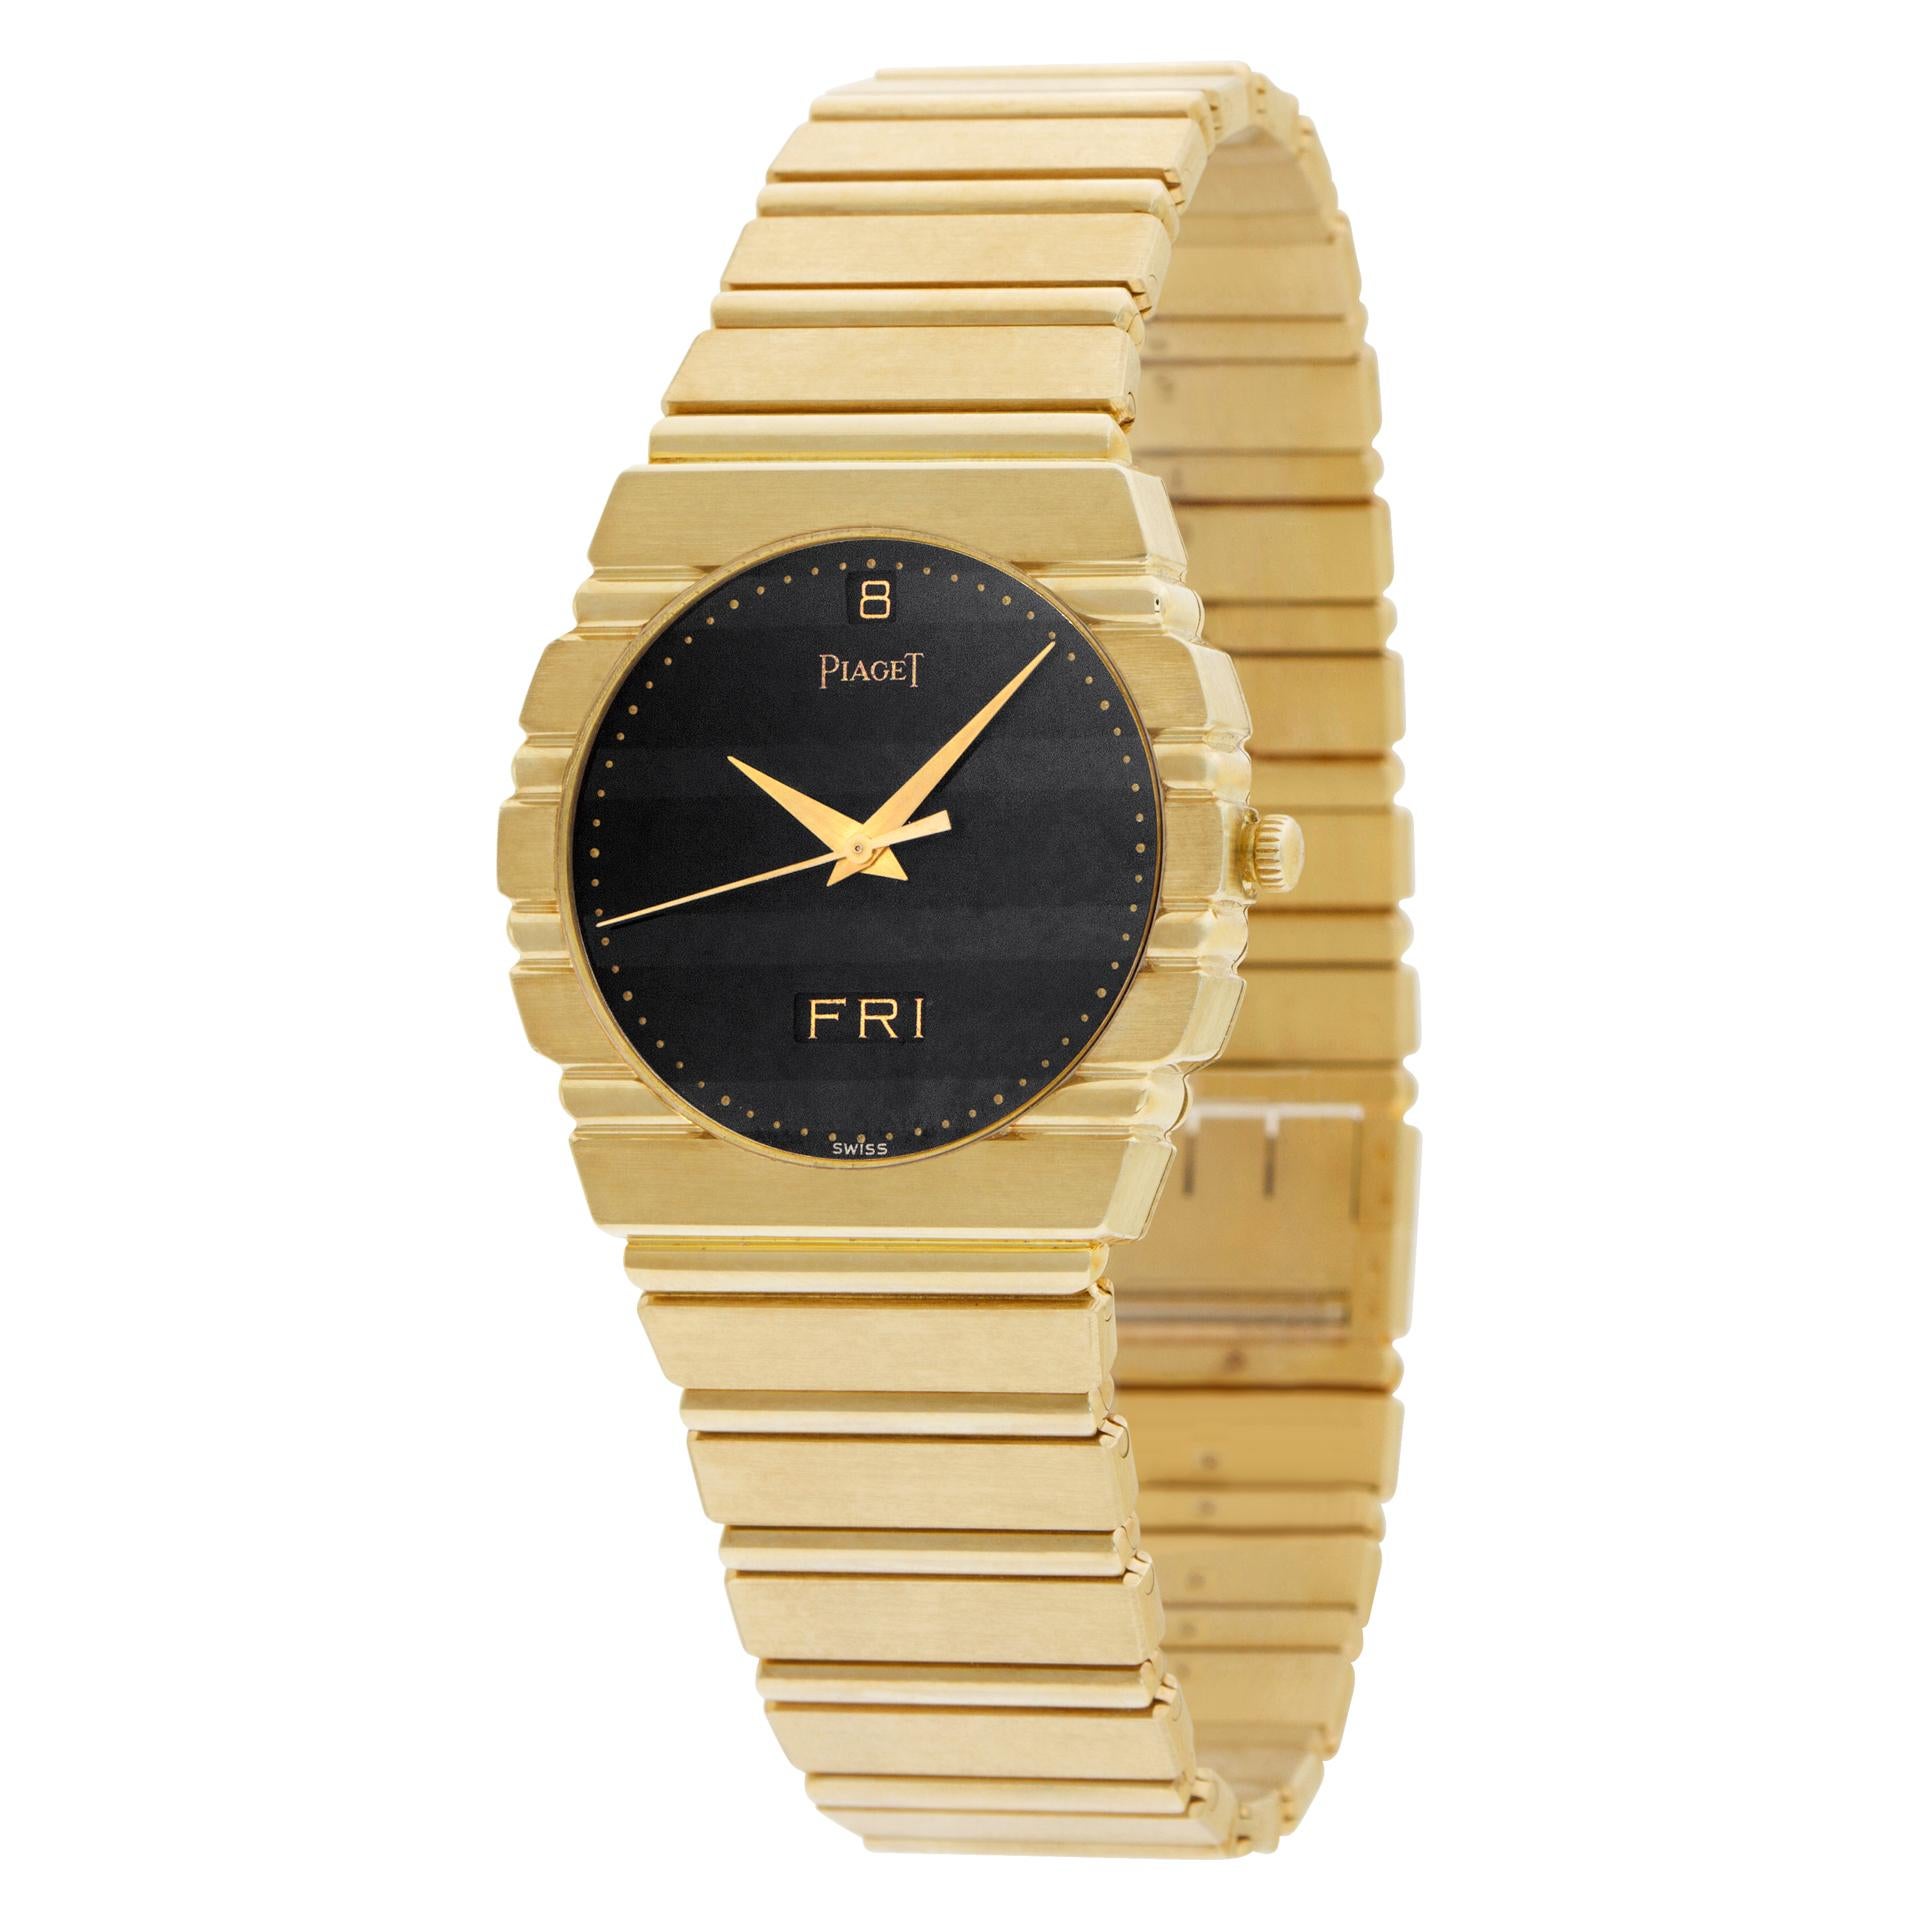 Piaget Polo Day-Date with black bar dial in 18k yellow gold. Quartz w/ sweep seconds, date and day. 31.5 mm case size. With box and papers.Ref 15562 C 701. Circa 1980s. Fine Pre-owned Piaget Watch. Certified preowned Dress Piaget Polo 15562 C 701